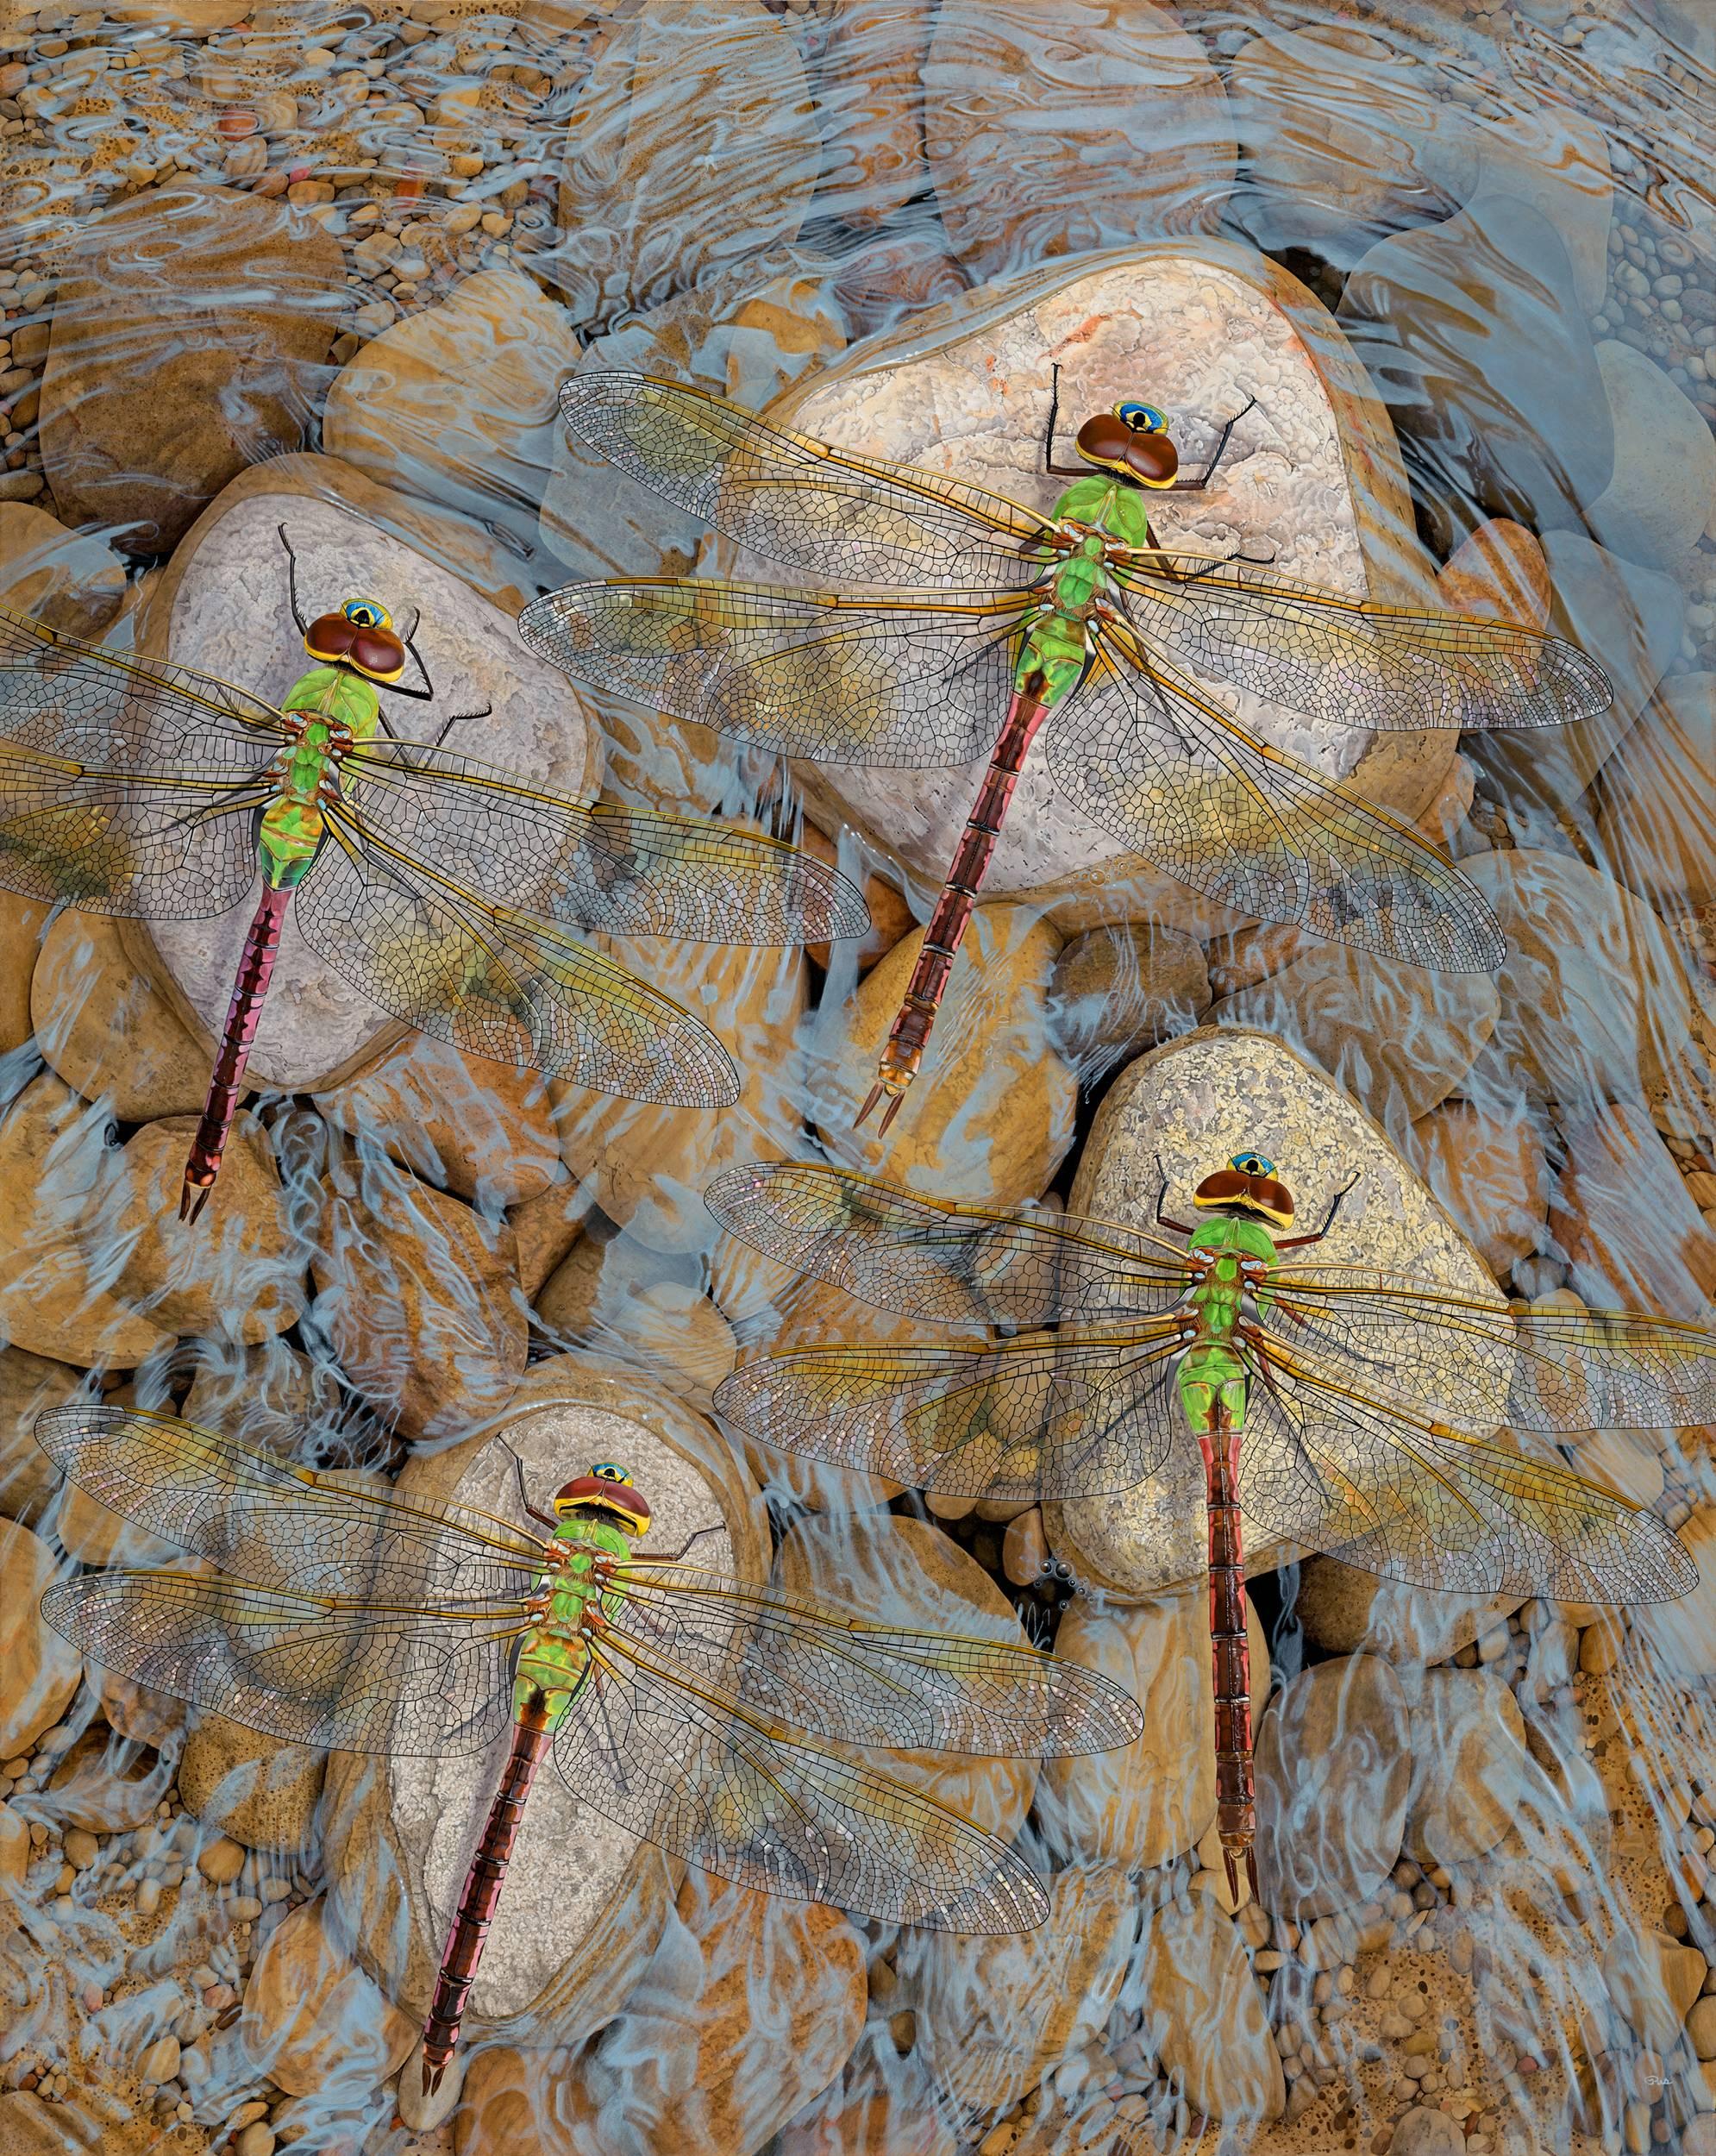 Rocks in the Current - Original Photorealist Painting of Dragonflies Atop Stones